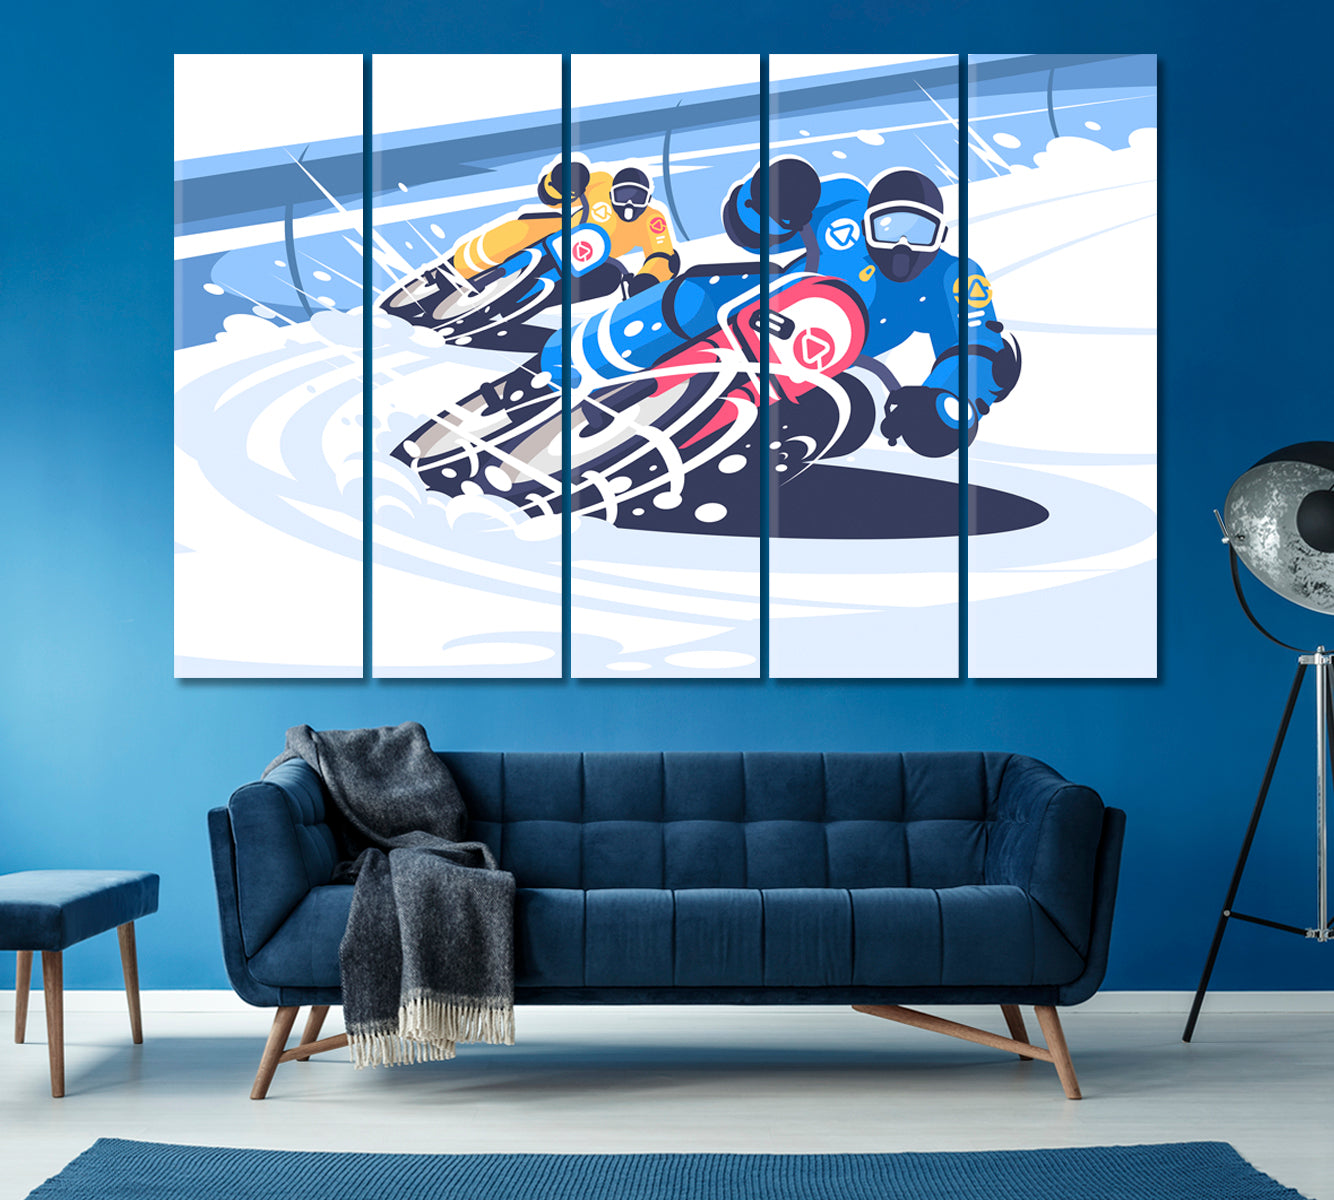 Motorcycle Racing Canvas Print ArtLexy 5 Panels 36"x24" inches 